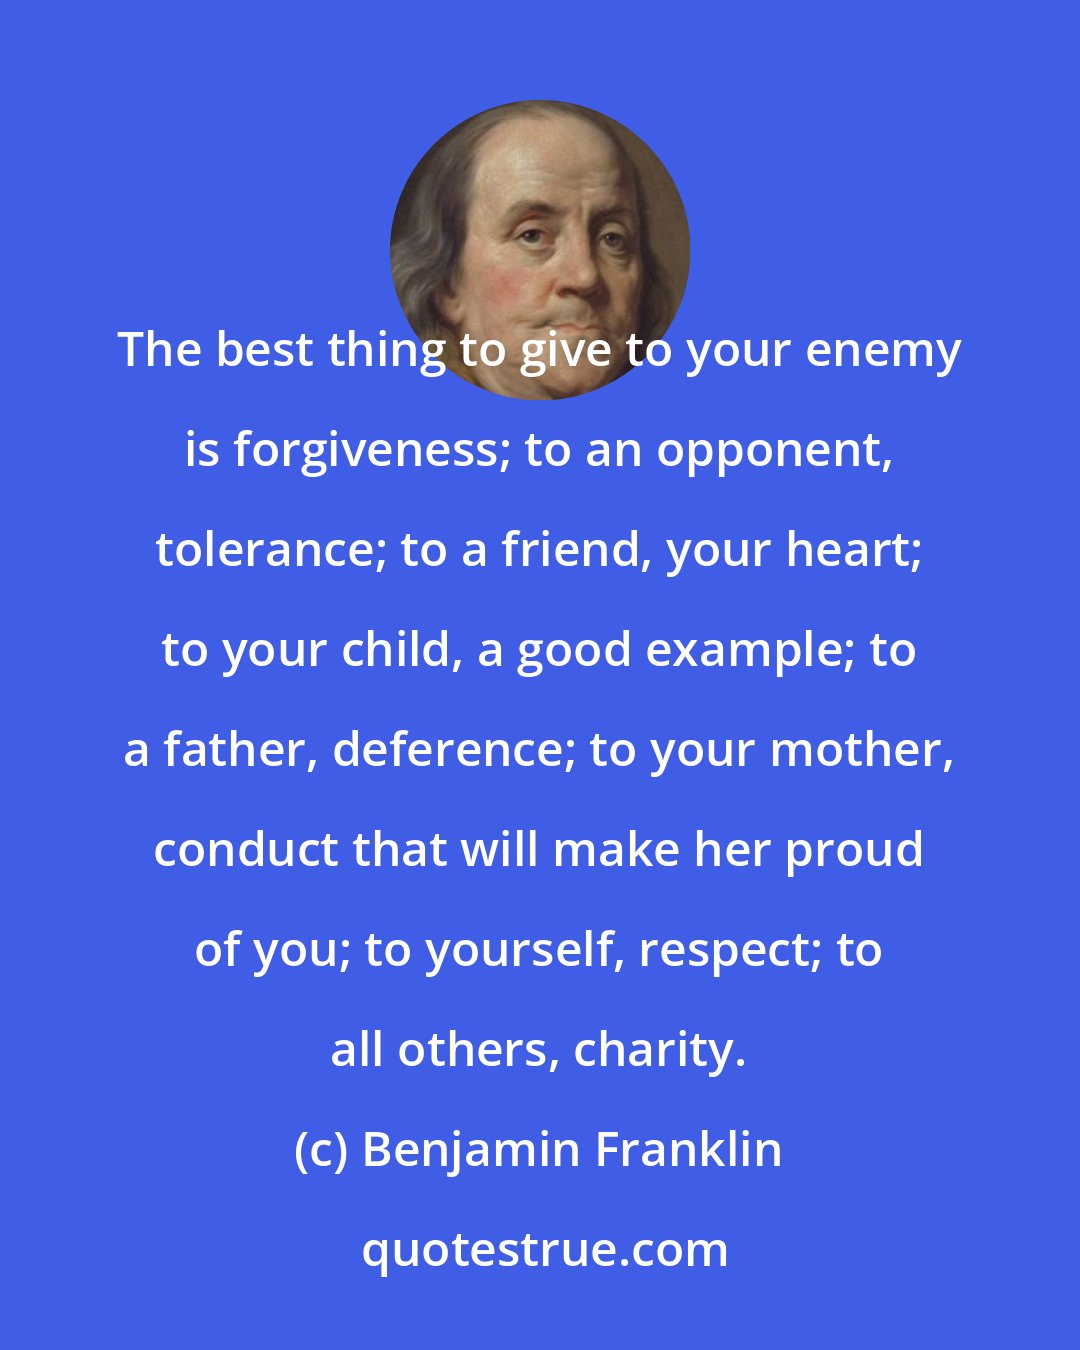 Benjamin Franklin: The best thing to give to your enemy is forgiveness; to an opponent, tolerance; to a friend, your heart; to your child, a good example; to a father, deference; to your mother, conduct that will make her proud of you; to yourself, respect; to all others, charity.